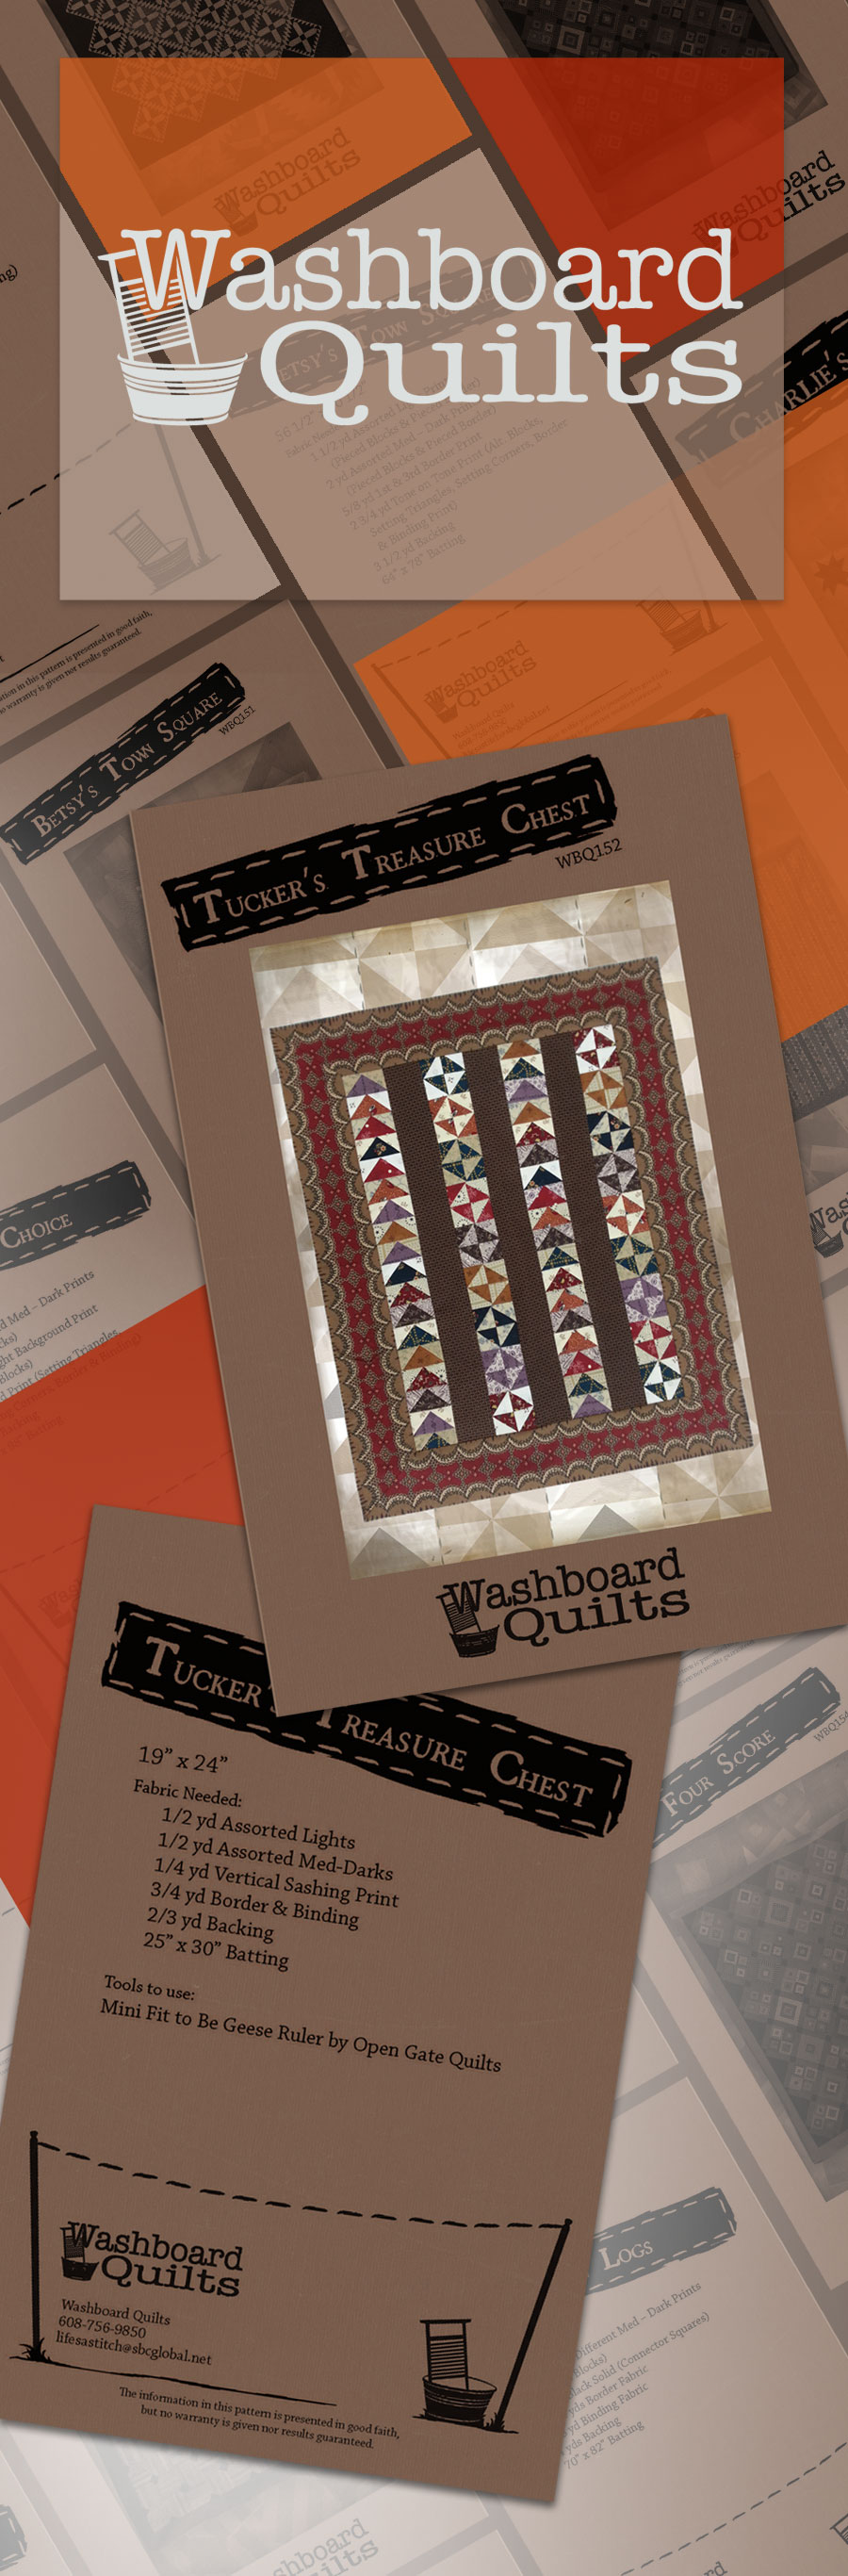 Washboard Quilts | Designed by Brooke Rogers